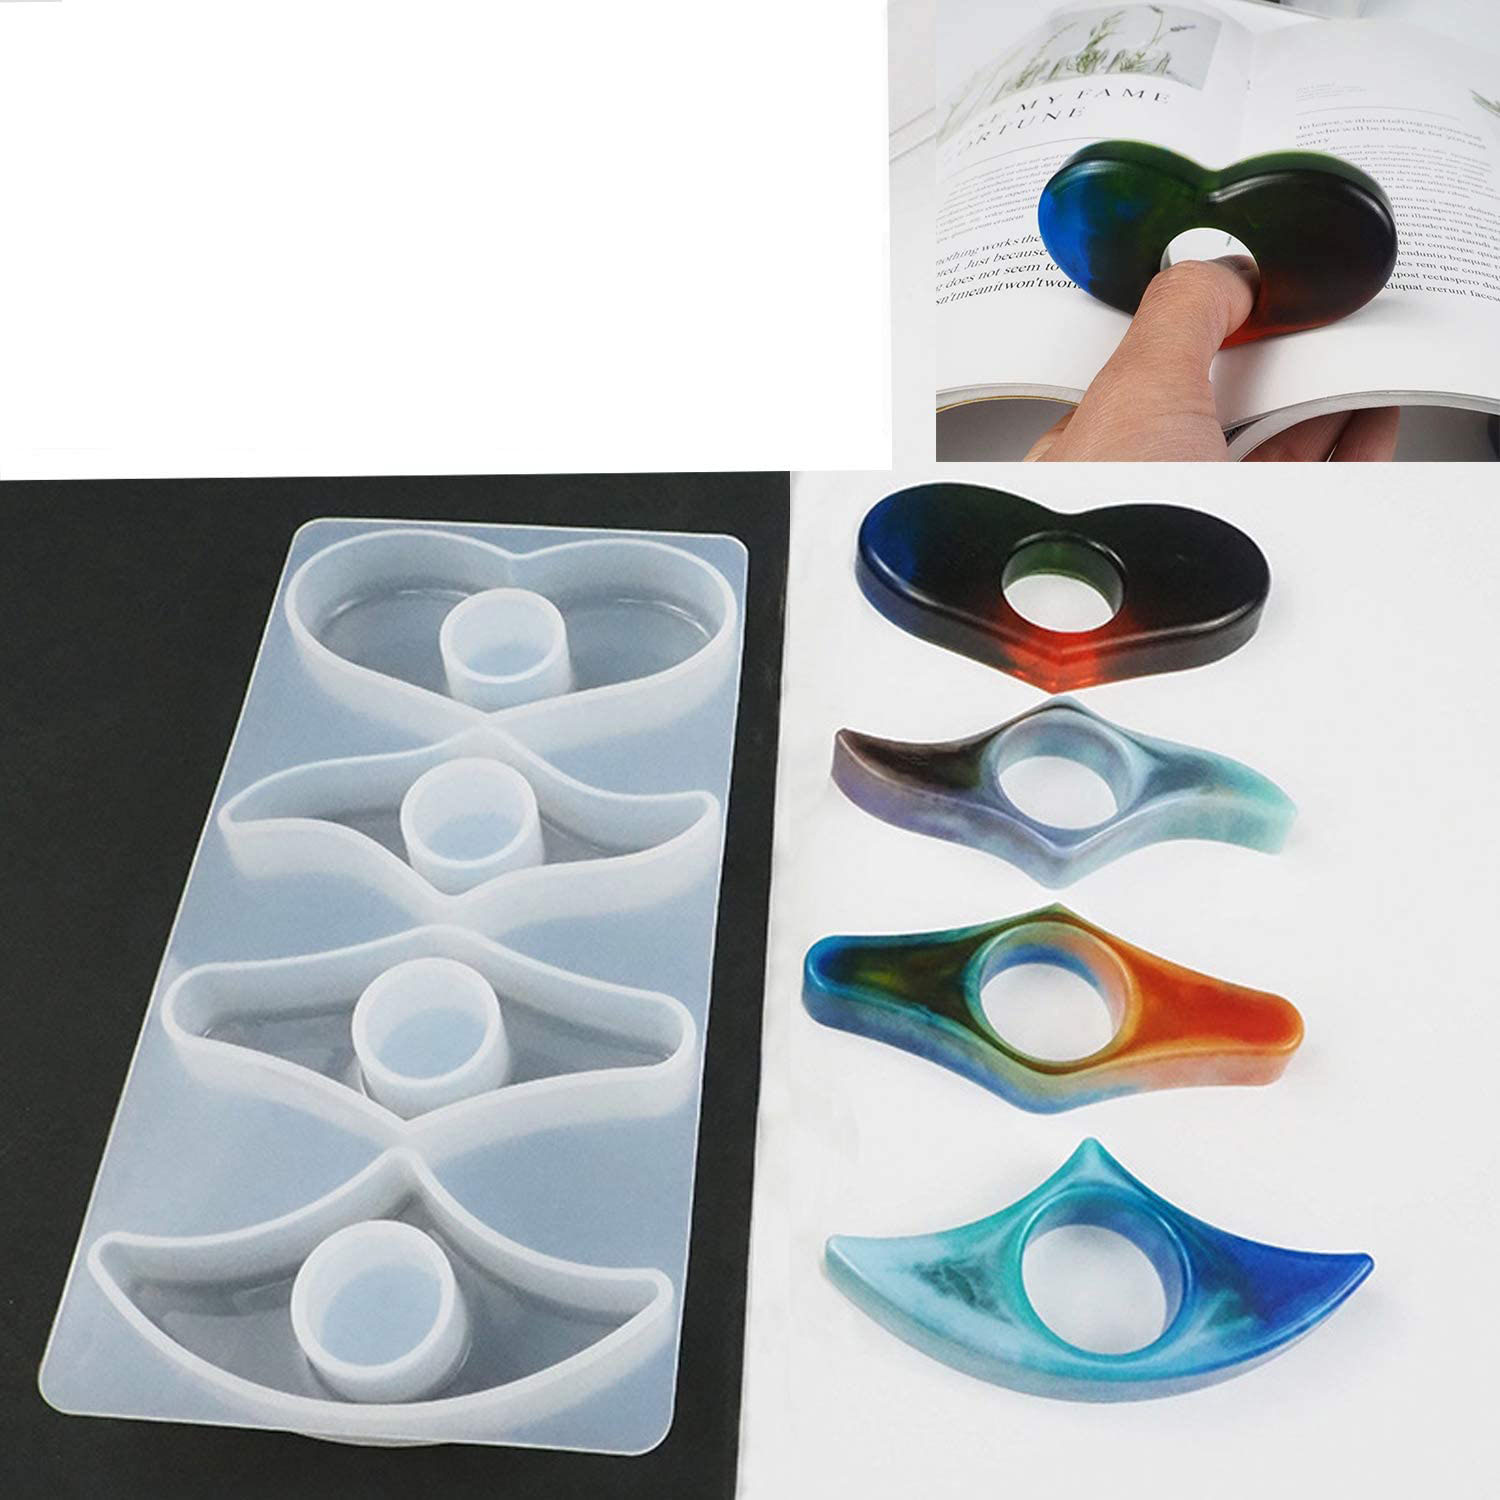 Silicone Thumb Ring Book Page Holder Resin Mold Literary Casting Making Mould Reading Holder Accessories Jewellry DIY Craft Handmade Tool